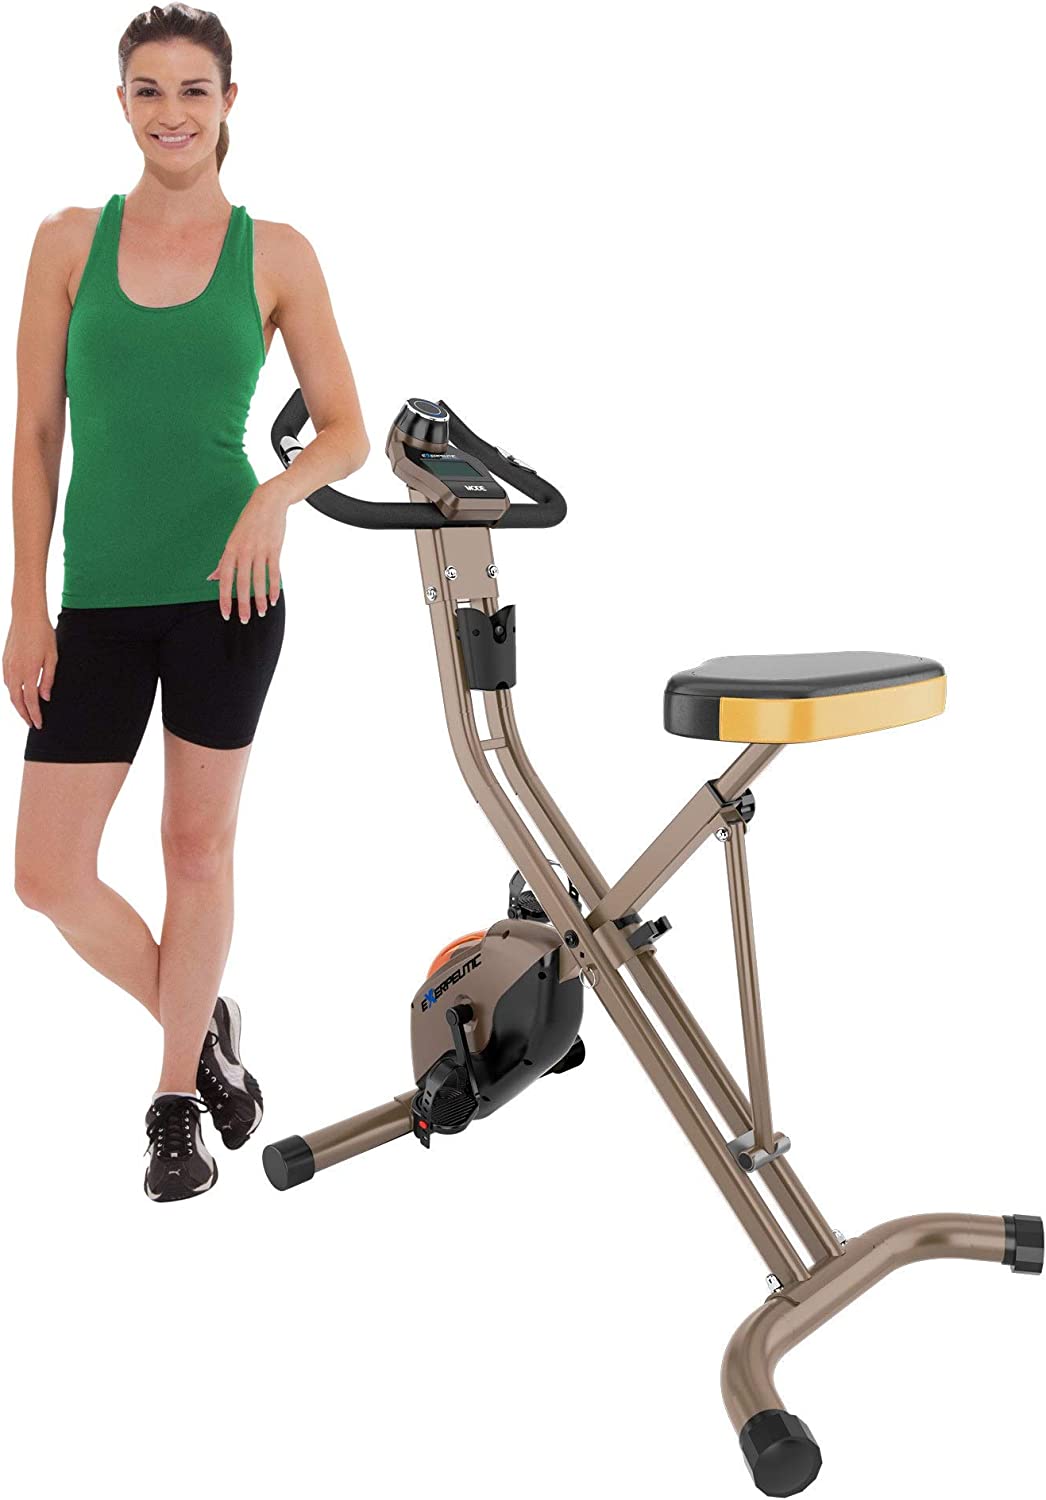  7. Exerpeutic Gold Heavy Duty Foldable Exercise Bike 